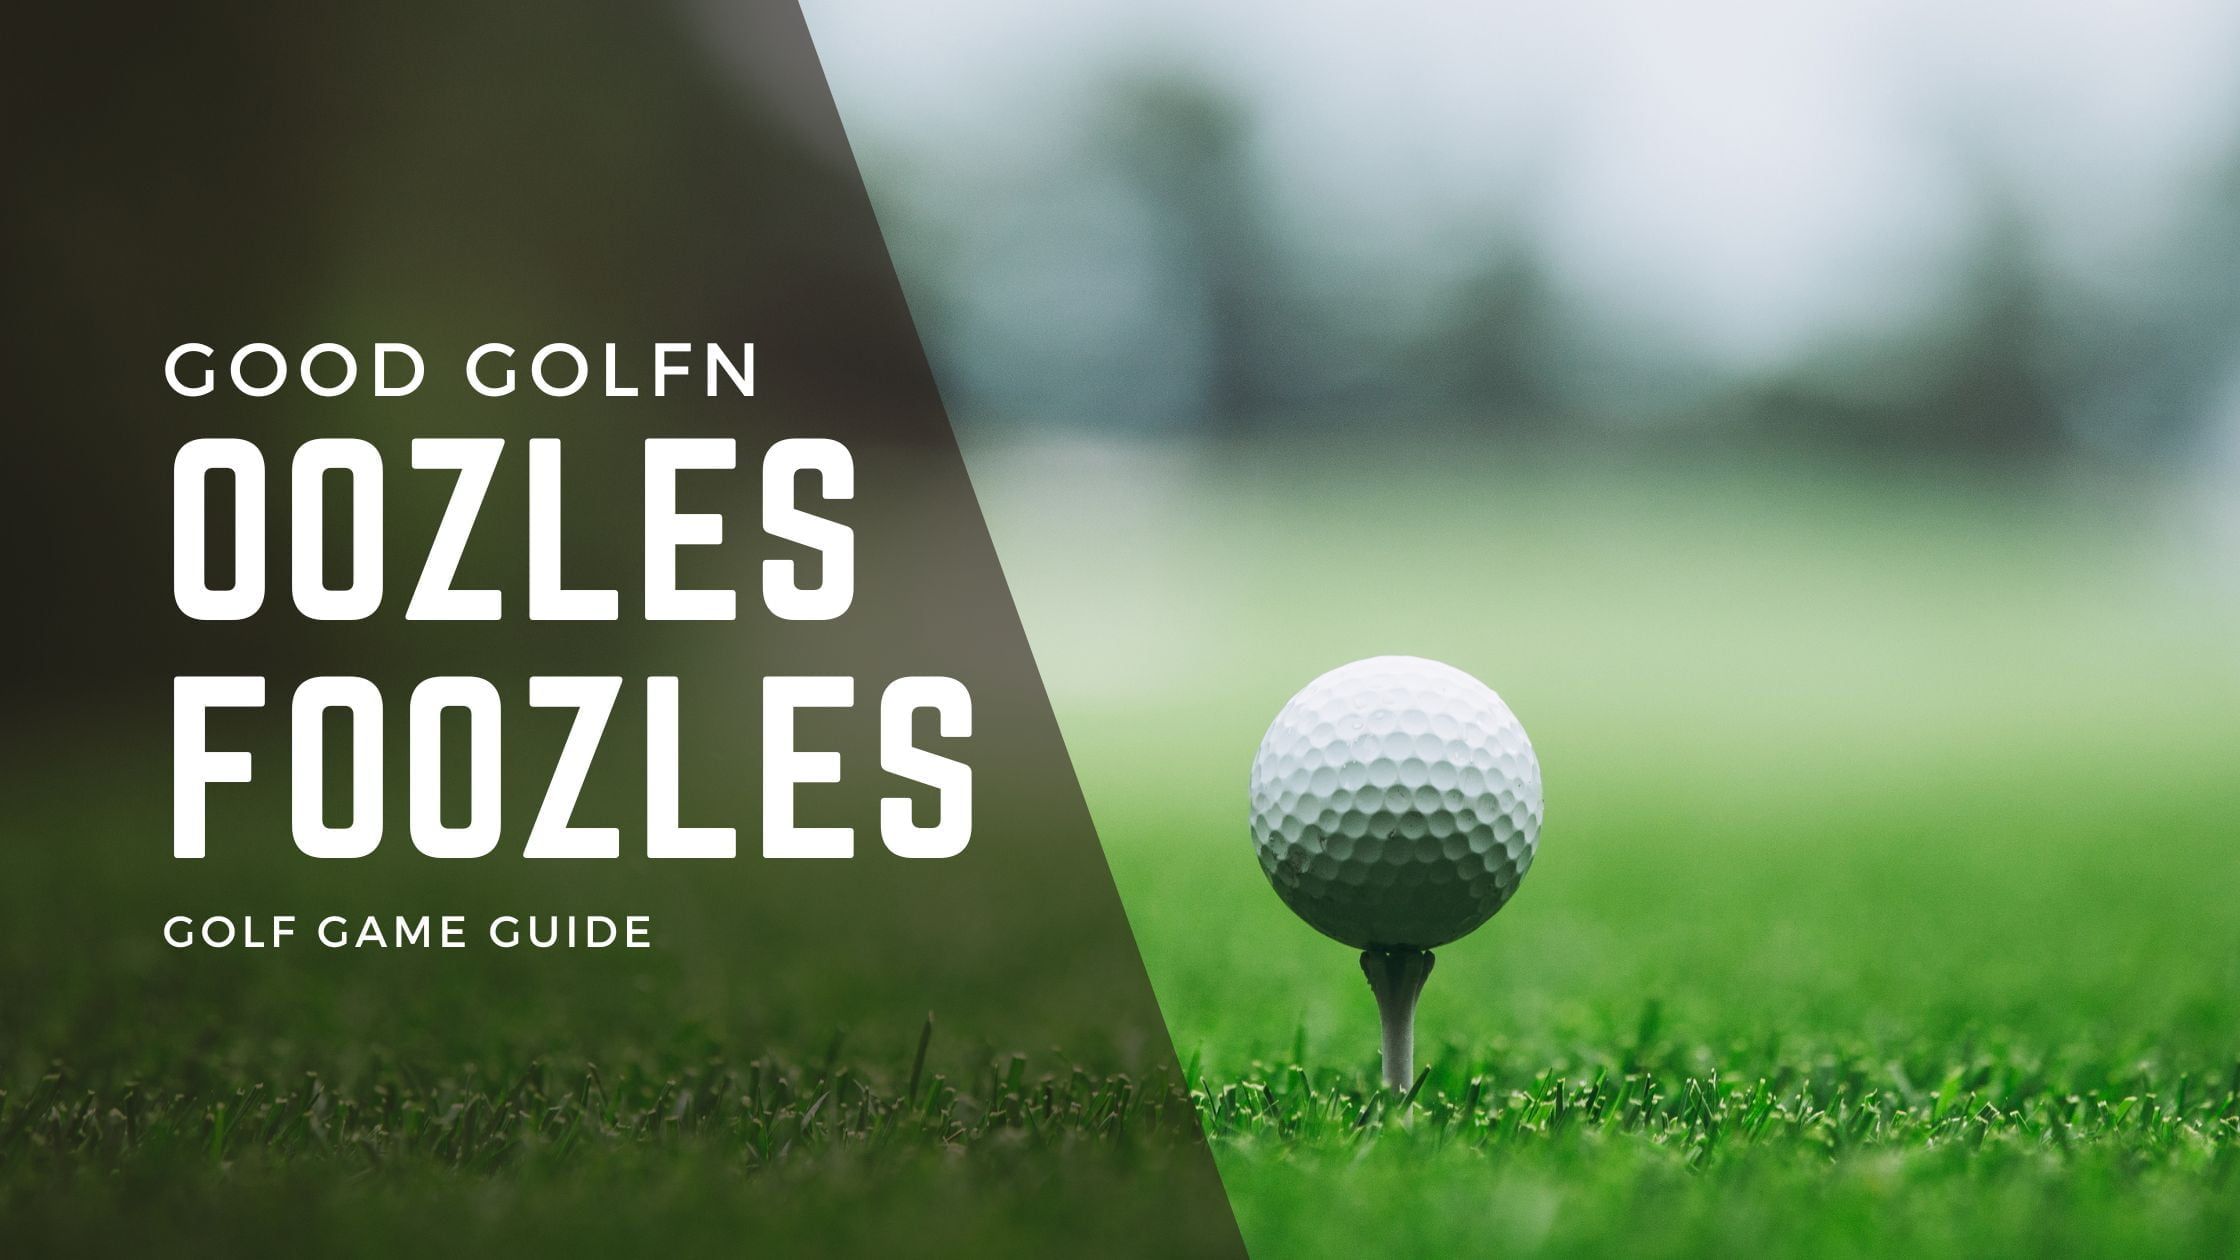 Dive deep into the world of golf with oozles foozles! Learn the history, rules, and strategies to dominate this exciting game.